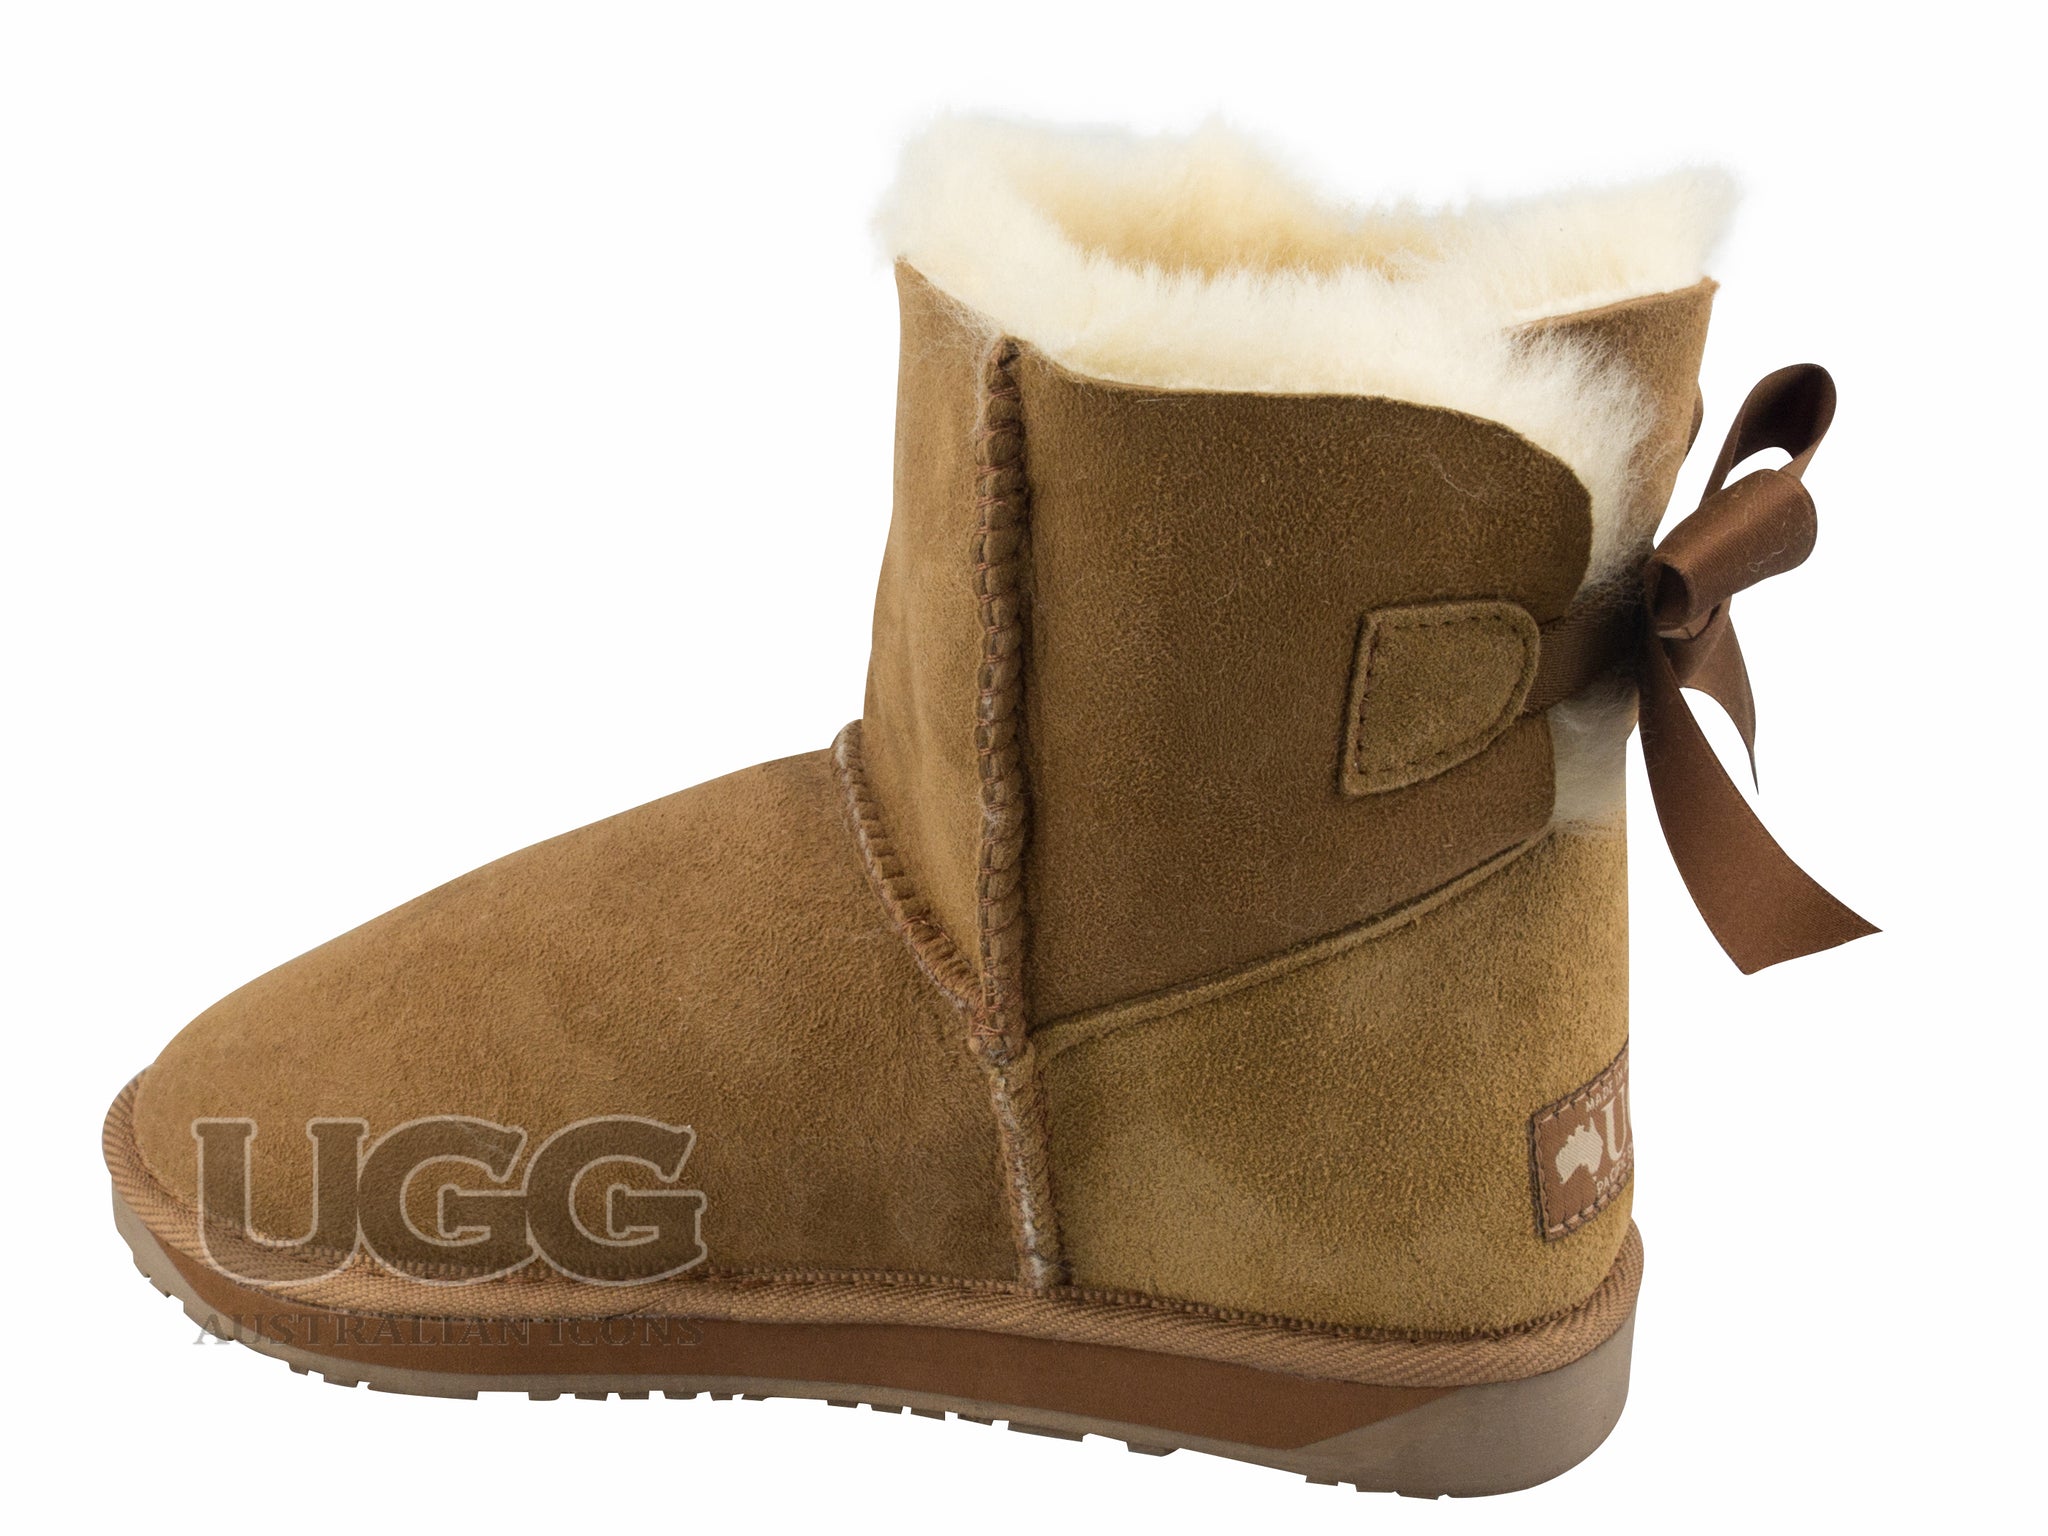 ugg boots with the bow in the back